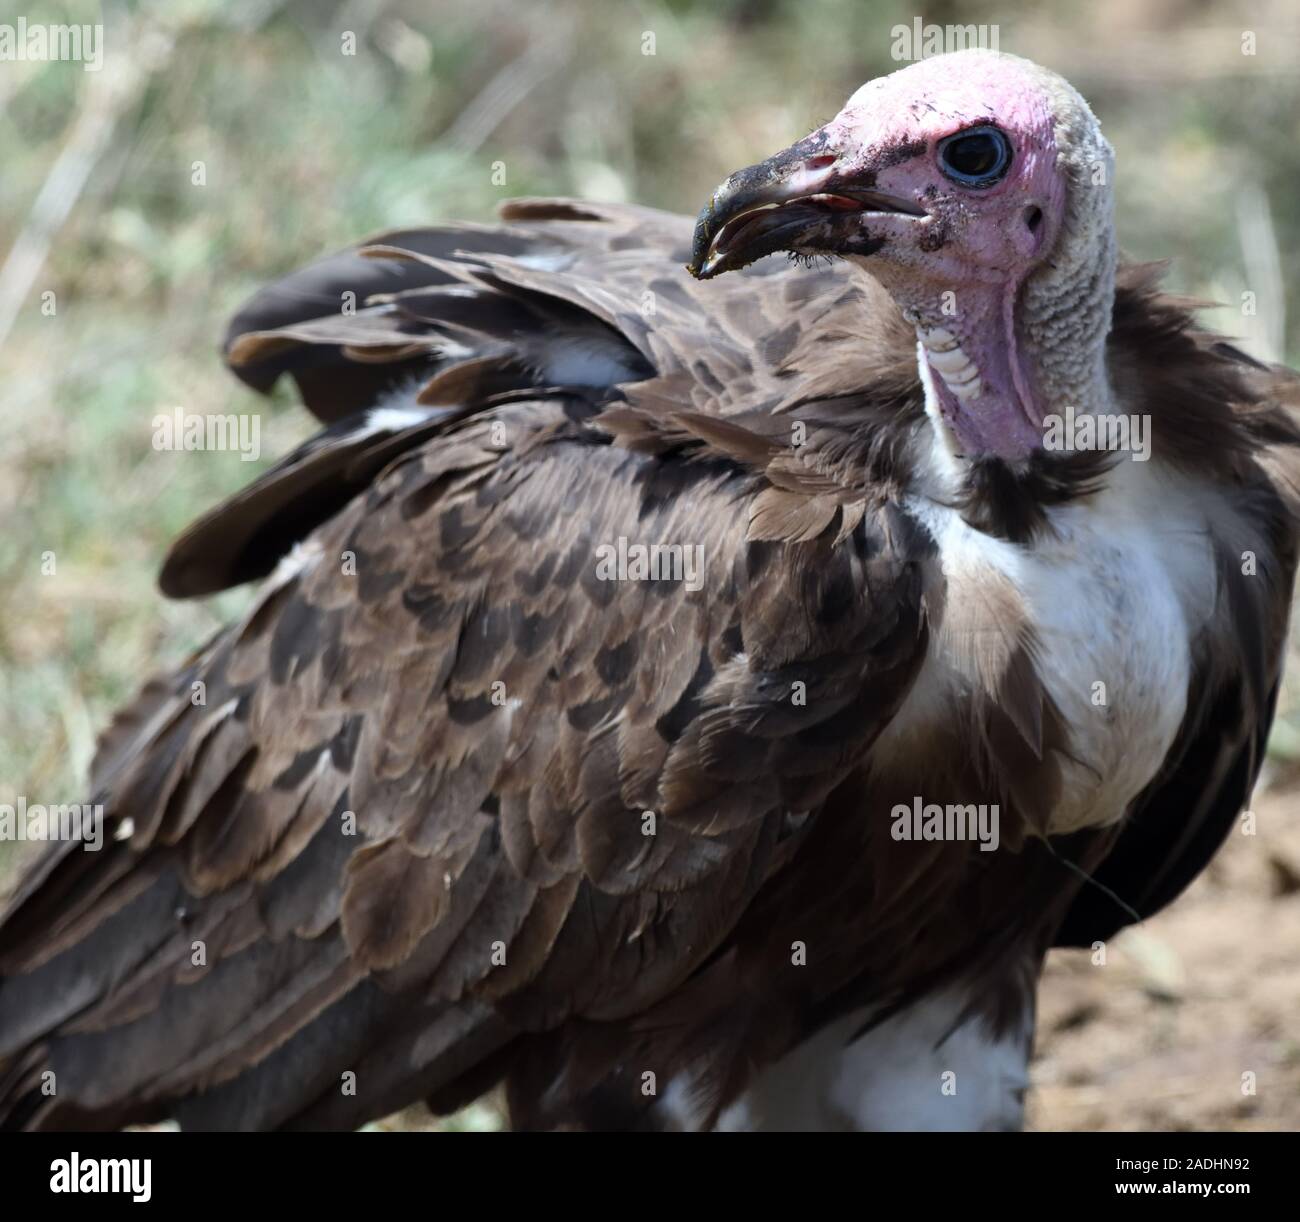 A hooded vulture (Necrosyrtes monachus) on the ground near the remains ...